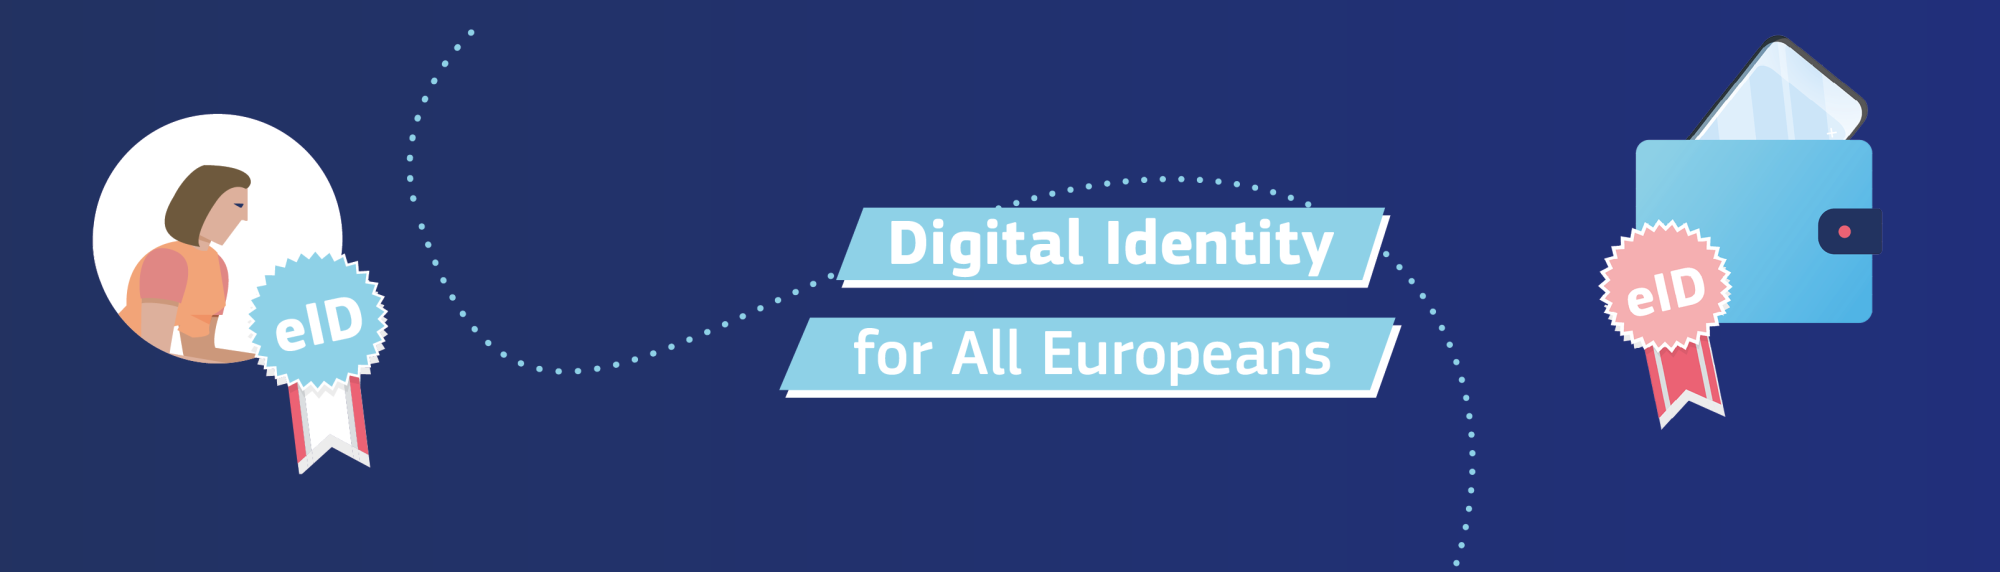 European Digital Identity Wallet: Council and Parliament Forge Provisional Agreement on EID